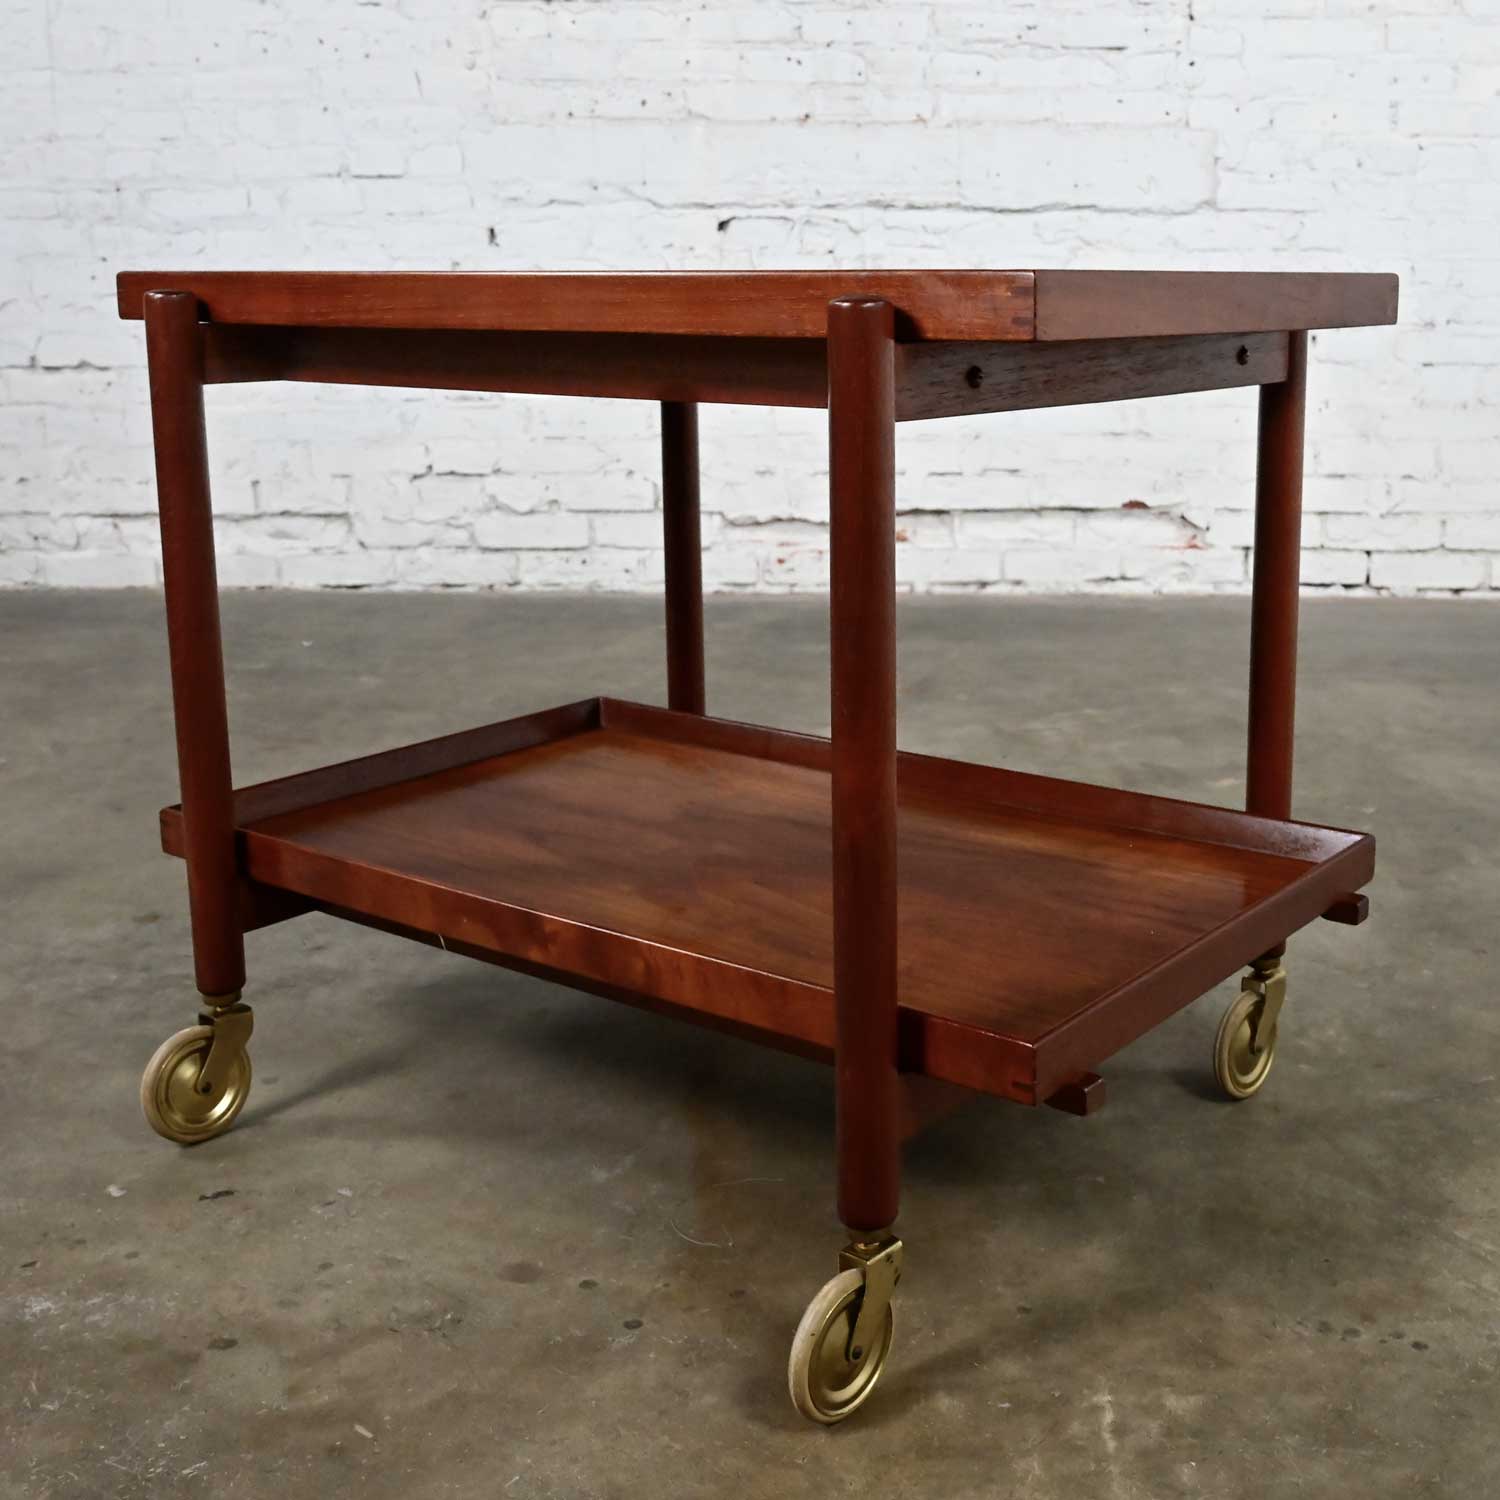 Handsome vintage Scandinavian Modern teak expanding bar or cocktail cart by Poul Hundevad. Beautiful condition, keeping in mind that this is vintage and not new so will have signs of use and wear. There are some small possible water marks on the